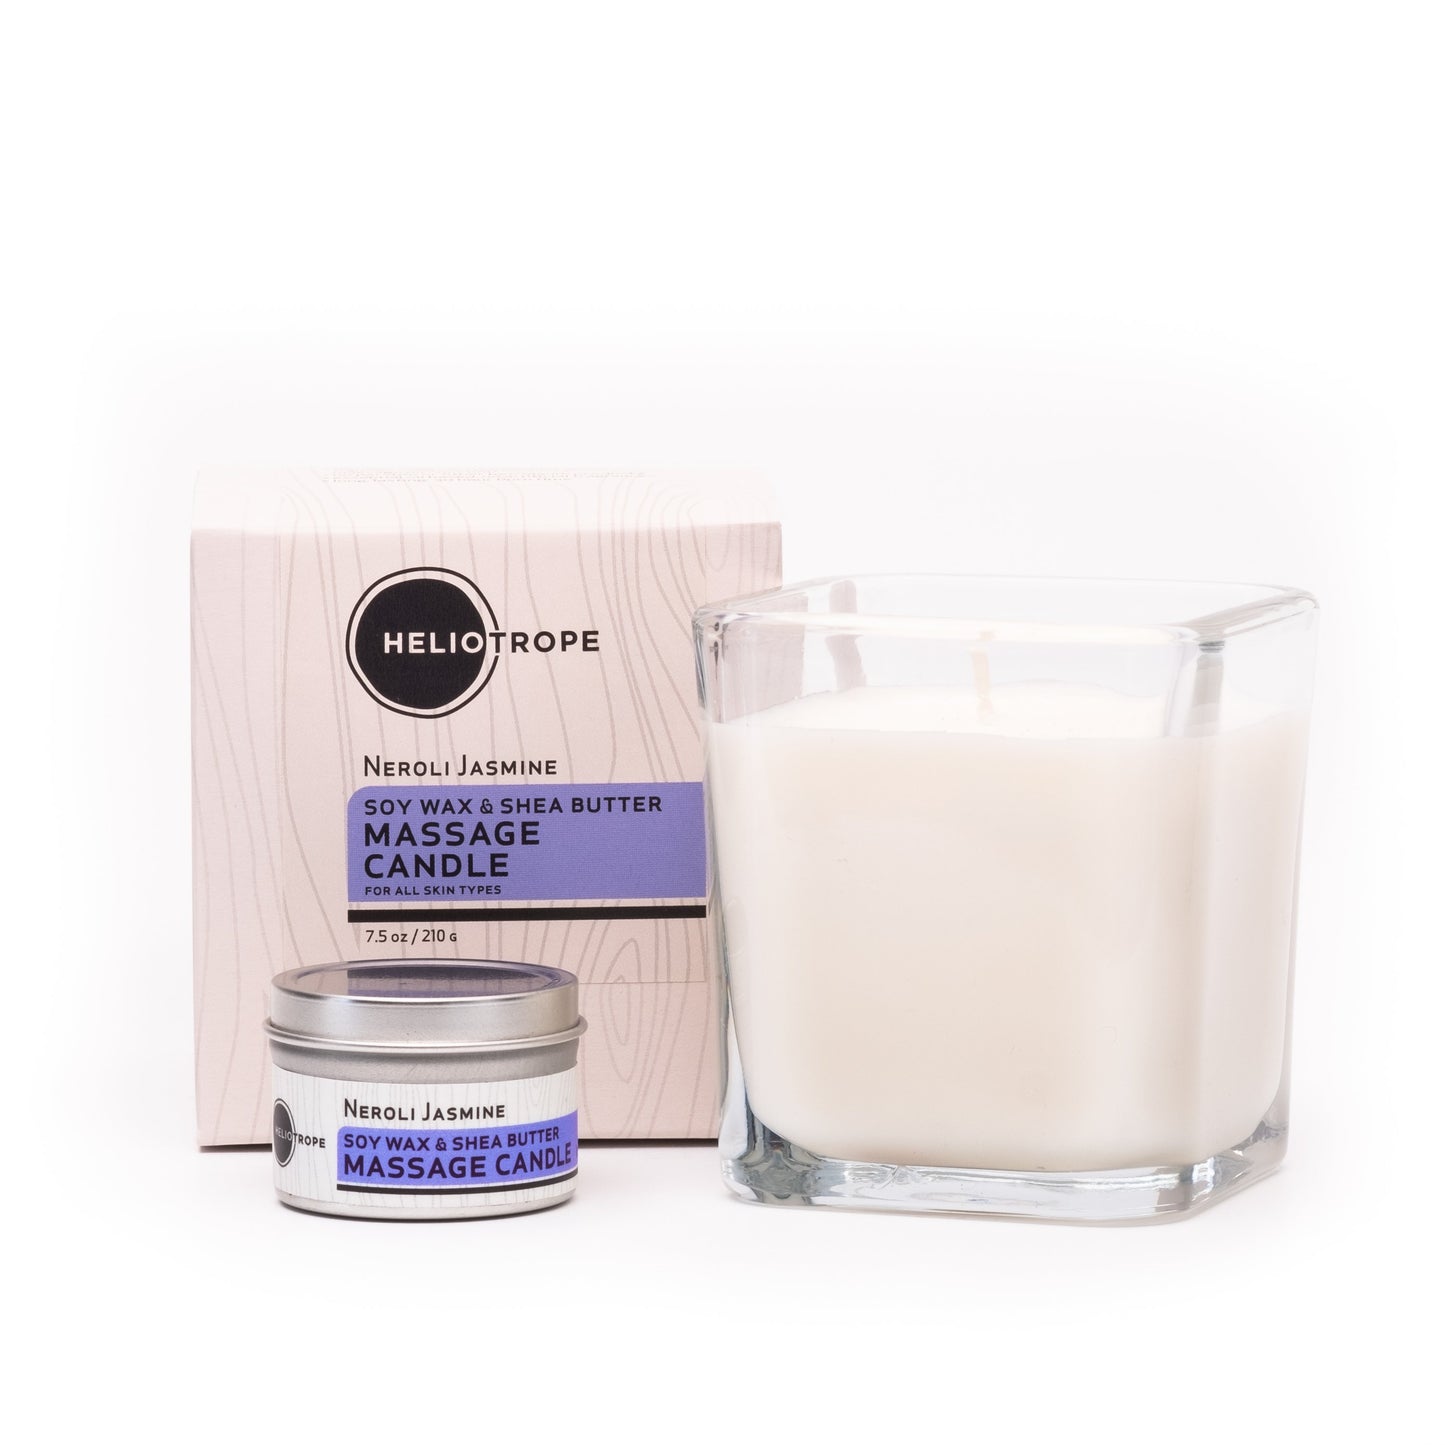 Soy Wax & Shea Butter Massage Candles - now in 3 sizes!